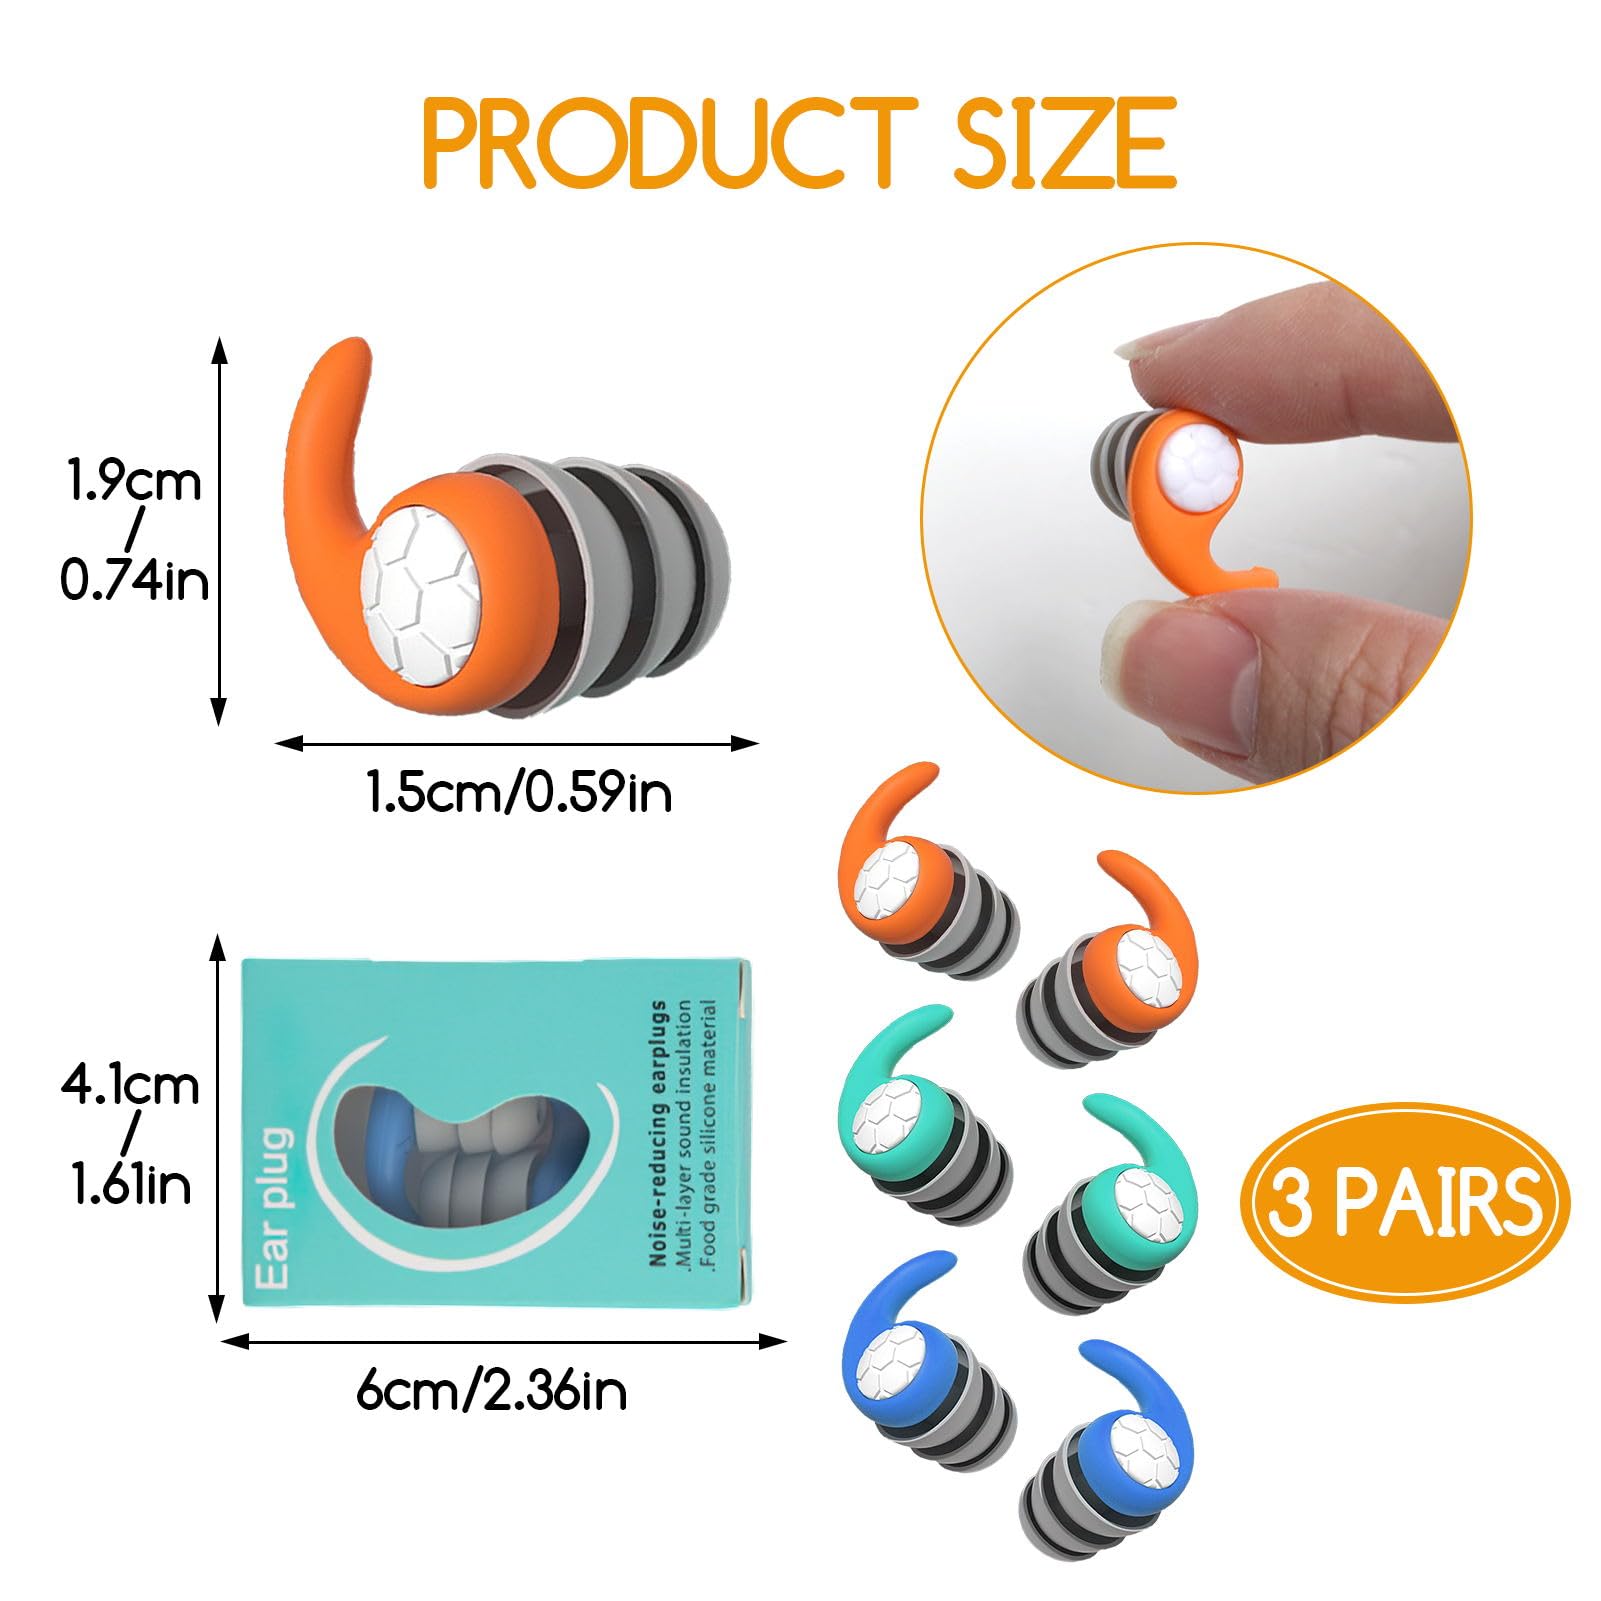 3 Pairs Waterproof Swimming Ear Plugs for Adults Reusable Soft Silicone Earplug Noise Reduction Swim Protection for Swimming Diving Surfing Showering Bathing and Other Water Sports (Orange Green Blue)